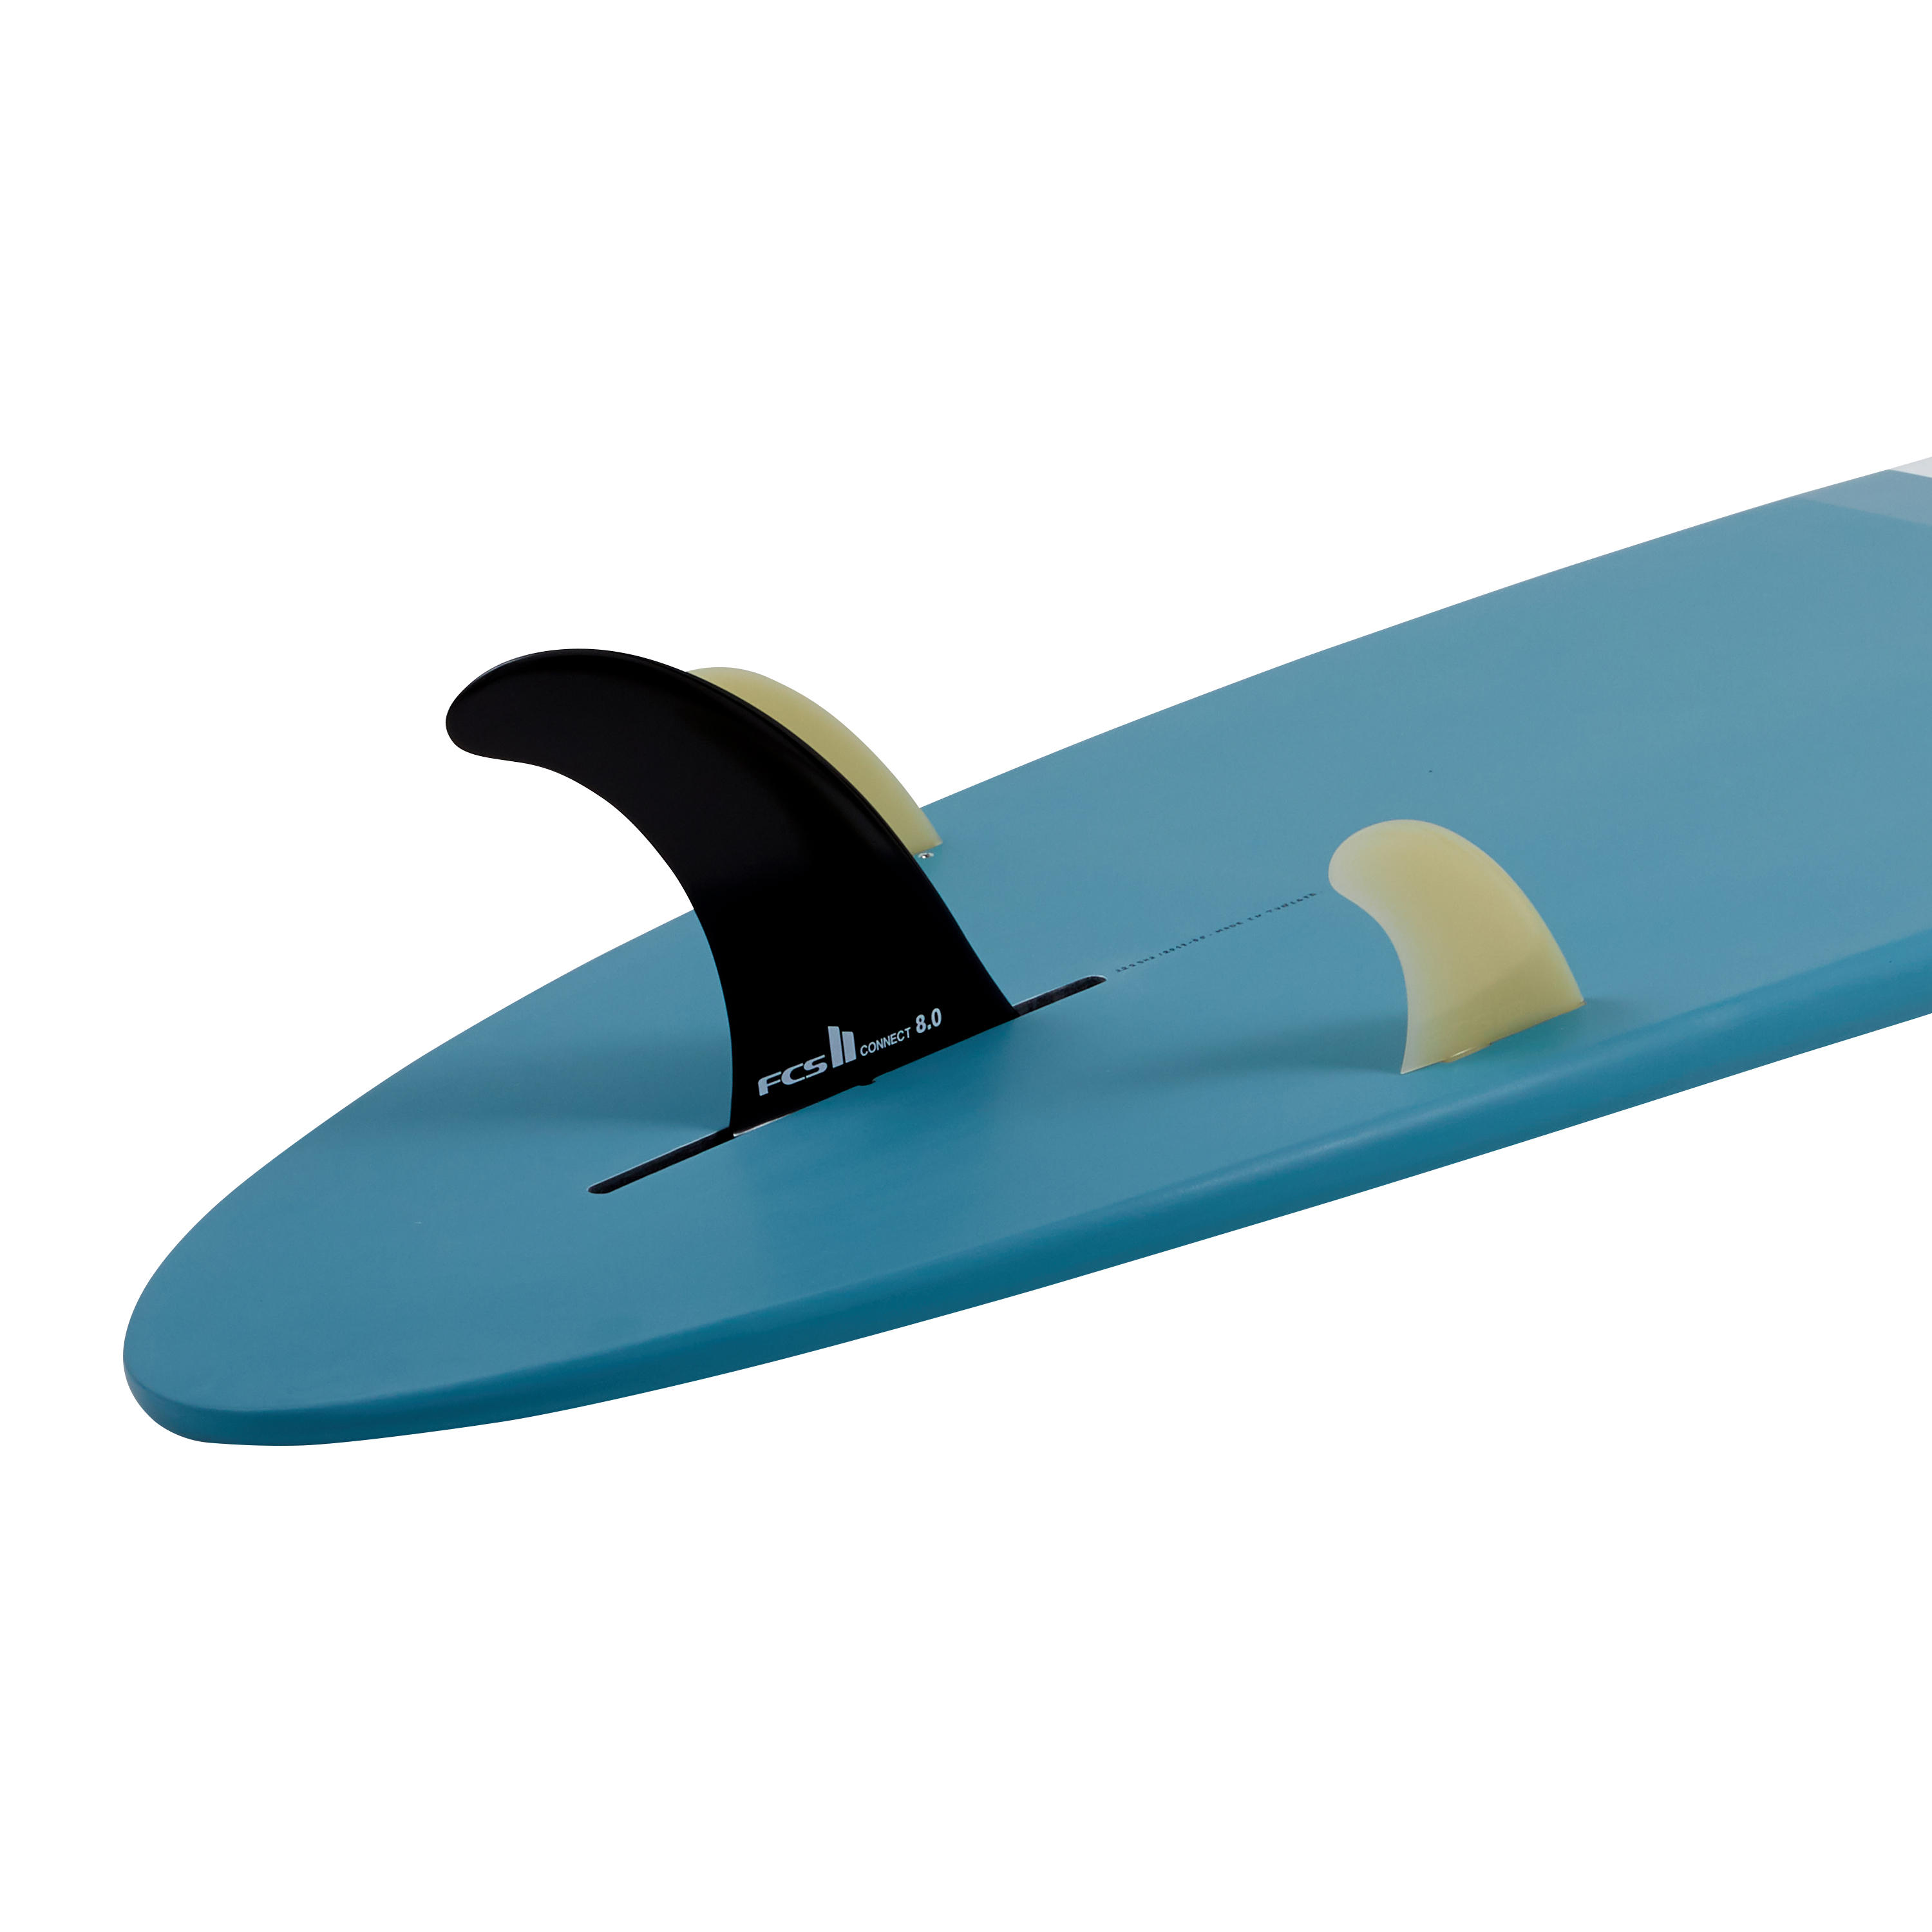 SURFBOARD LONGBOARD 900 Performance 9'. Comes with 2+1 fins. 9/10